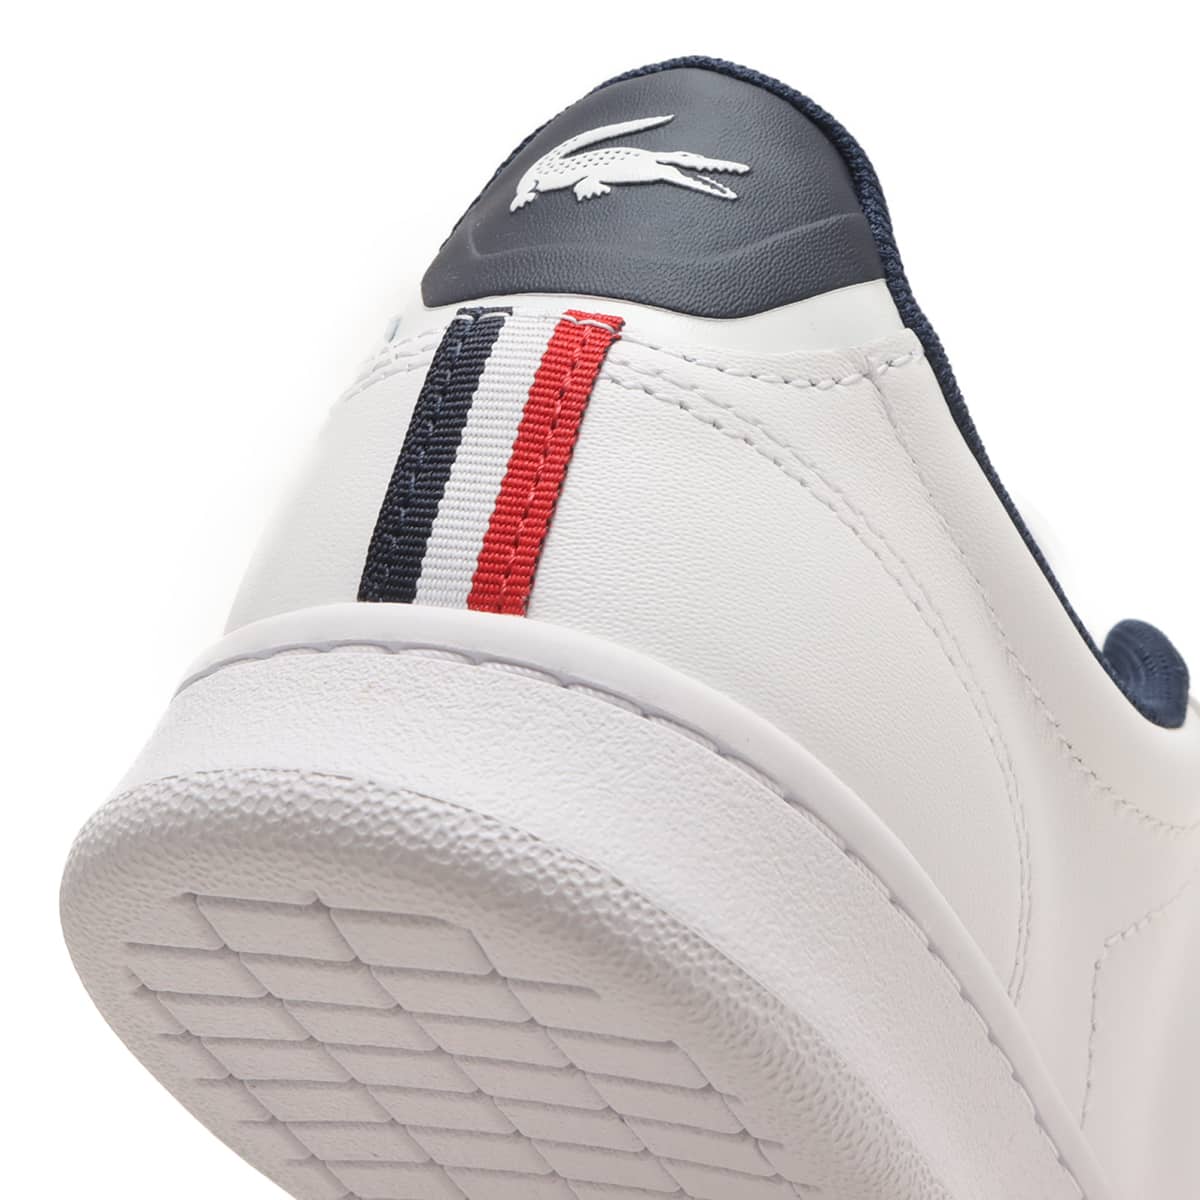 LACOSTE CARNABY PRO TRI 123 1 SFA WHT/NVY/RED 23FA-I